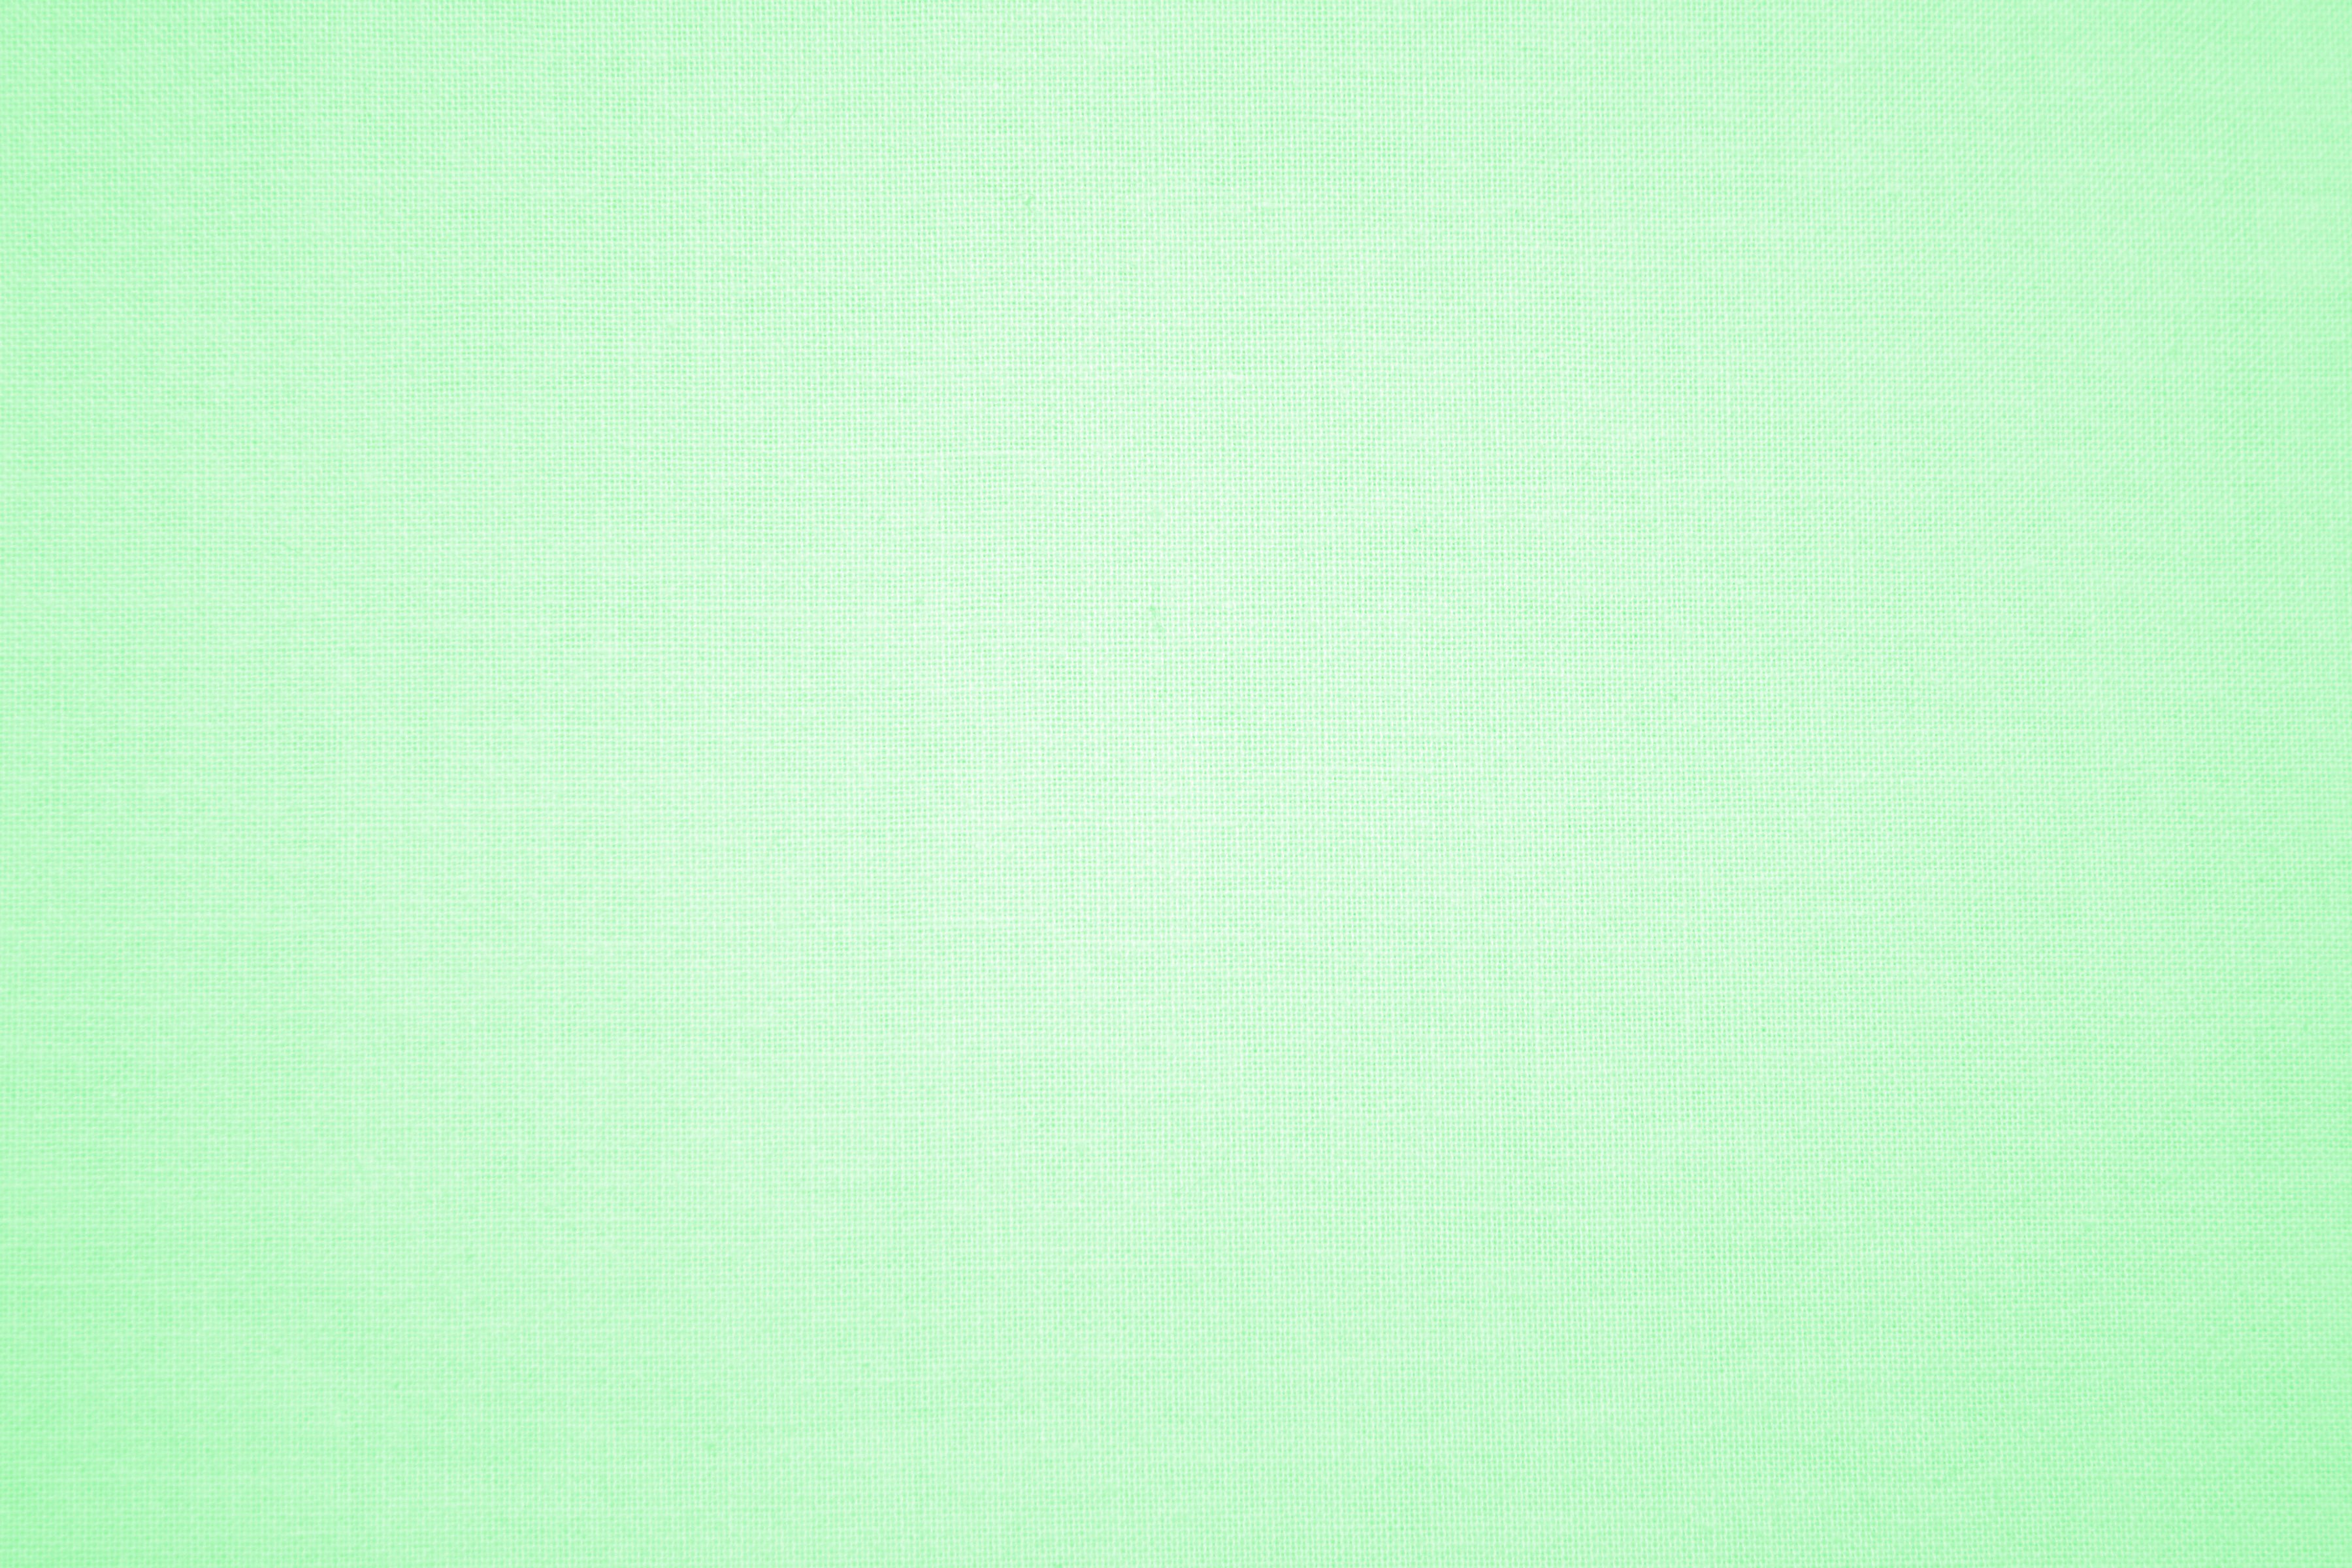 Pastel Green S Fabric Texture Picture Photograph Photos